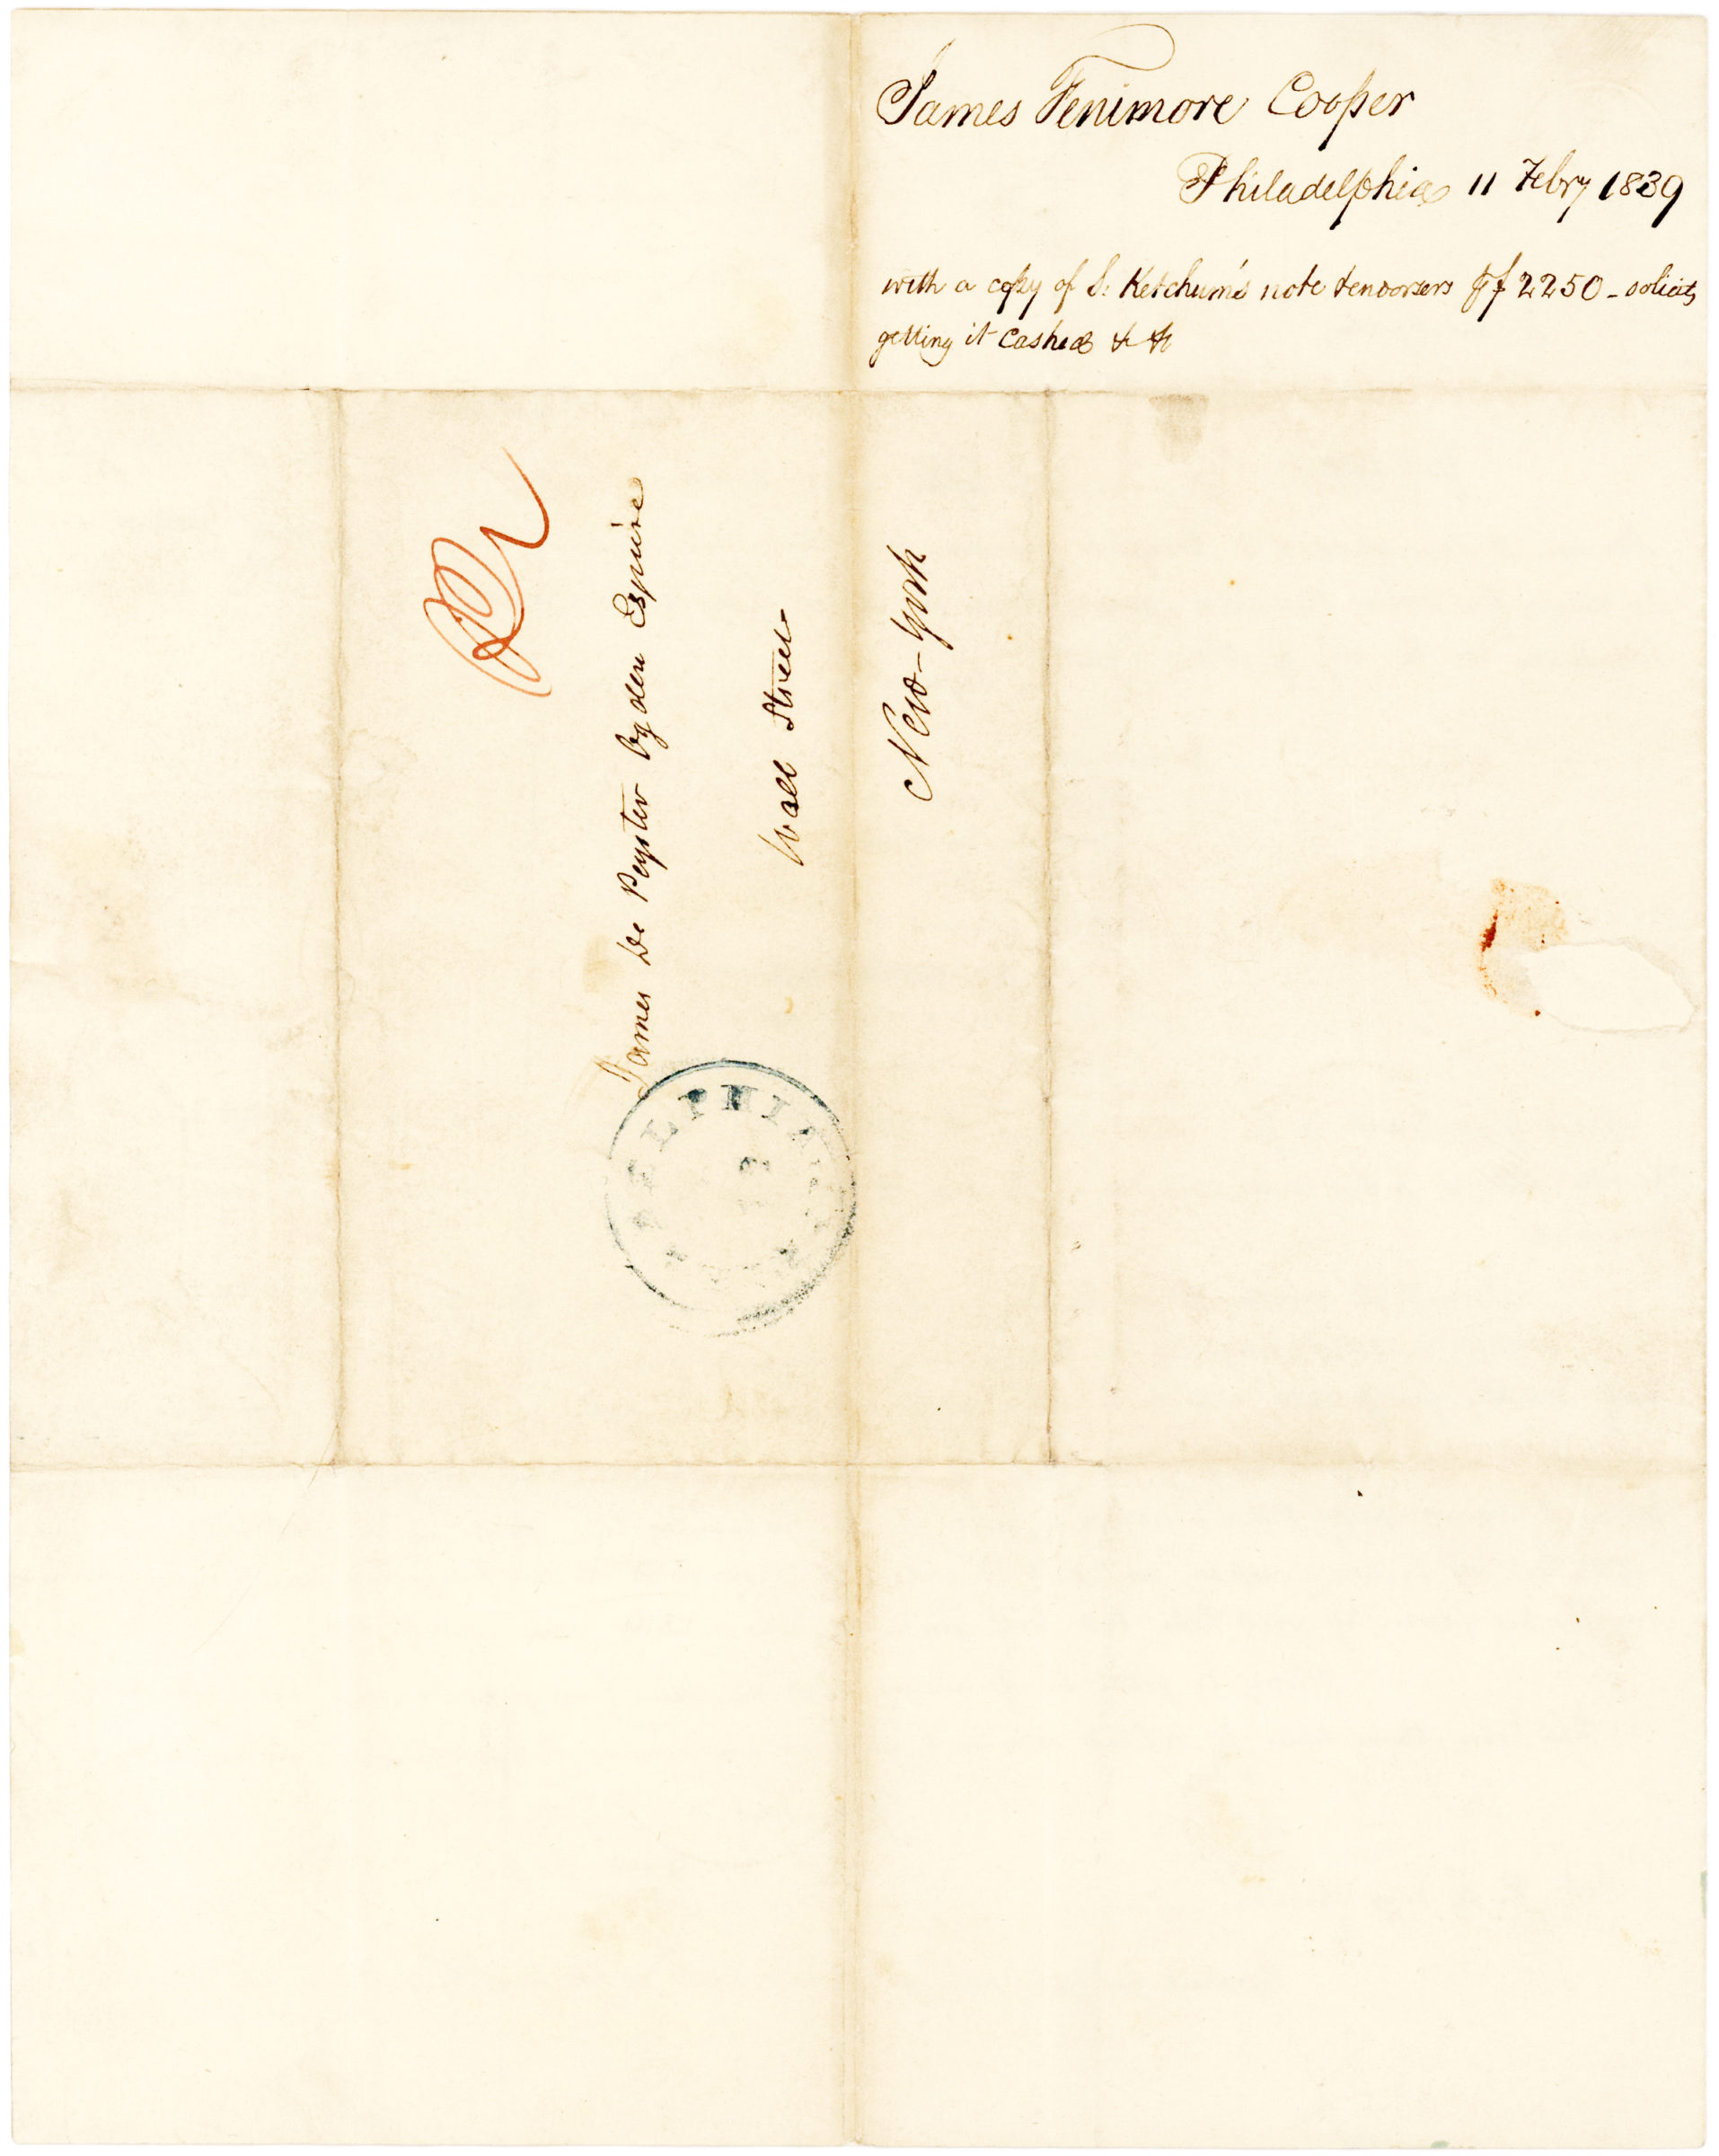 Autograph Letter about Being Refunded for his Investments in Cotton and Lands in the Western United States